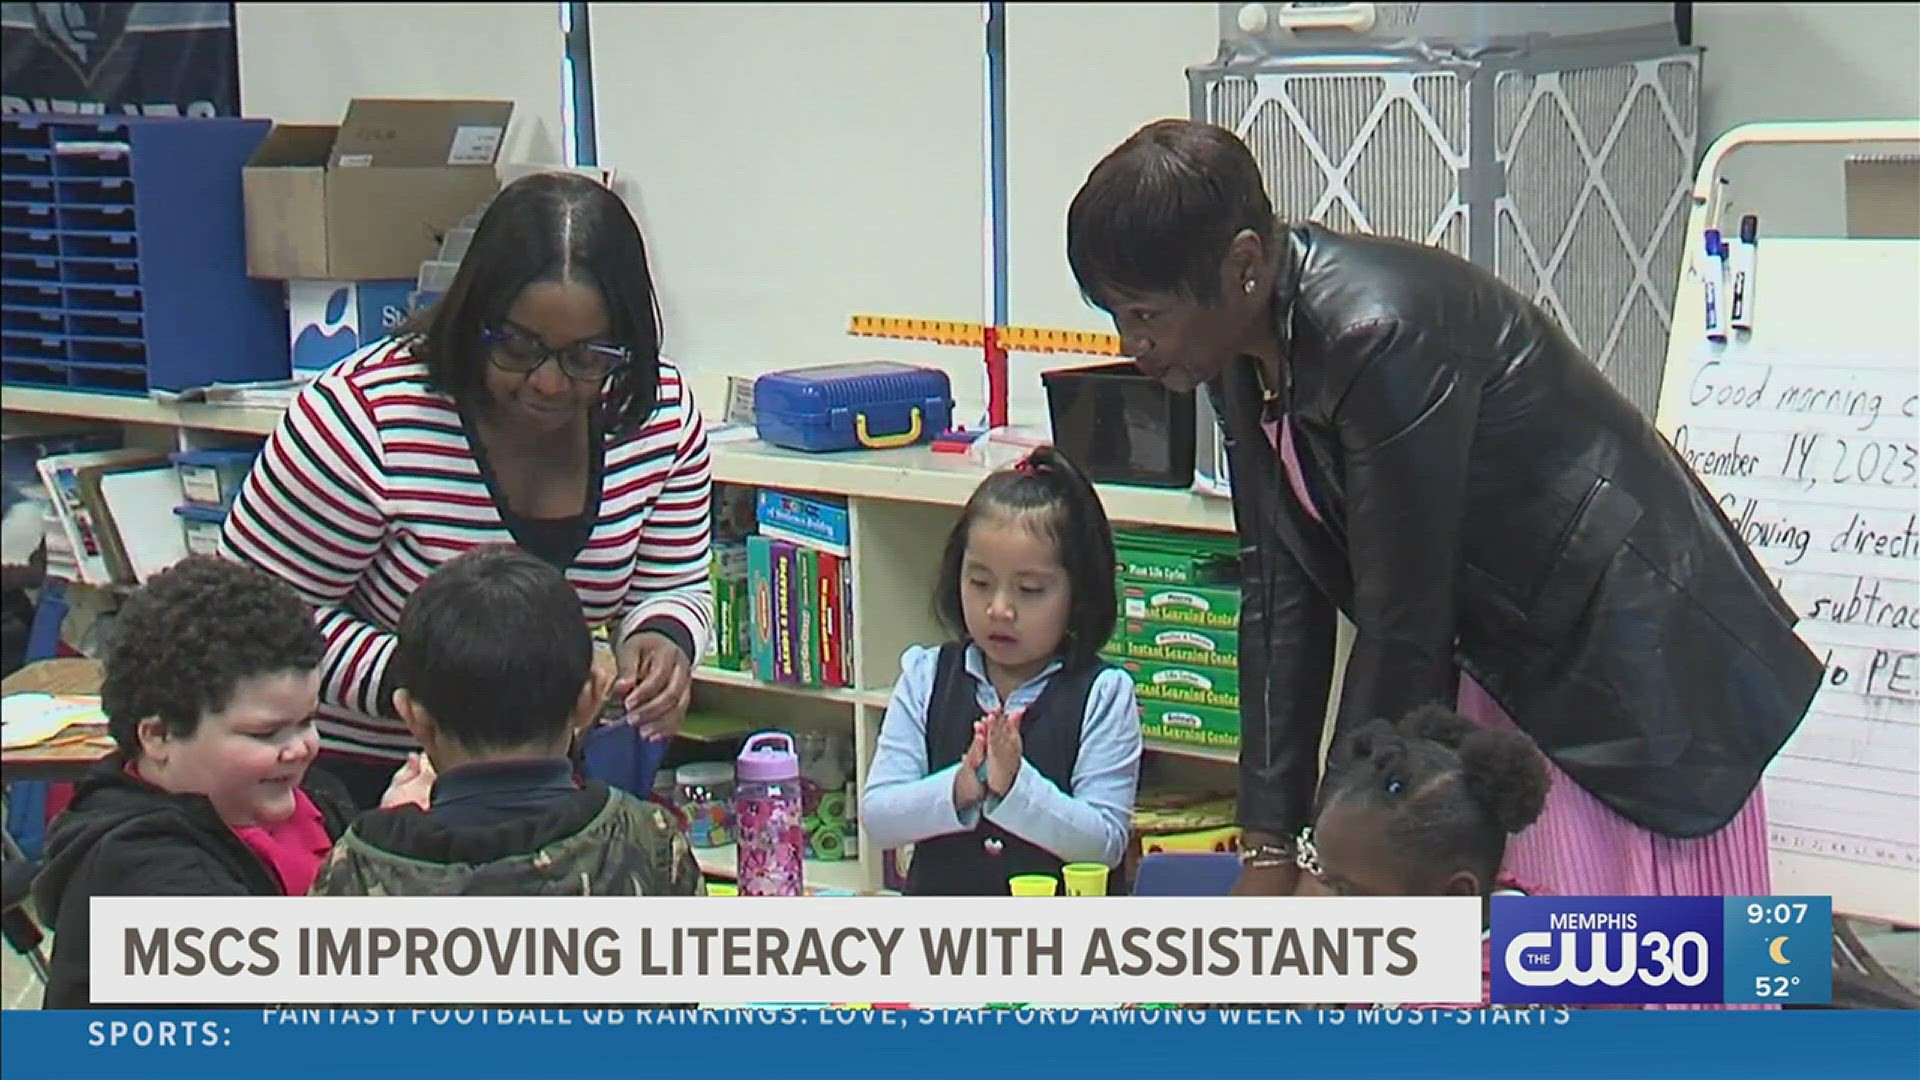 The district showed off specialized education assistants available to help elementary students At Willow Oaks improve their reading skills.